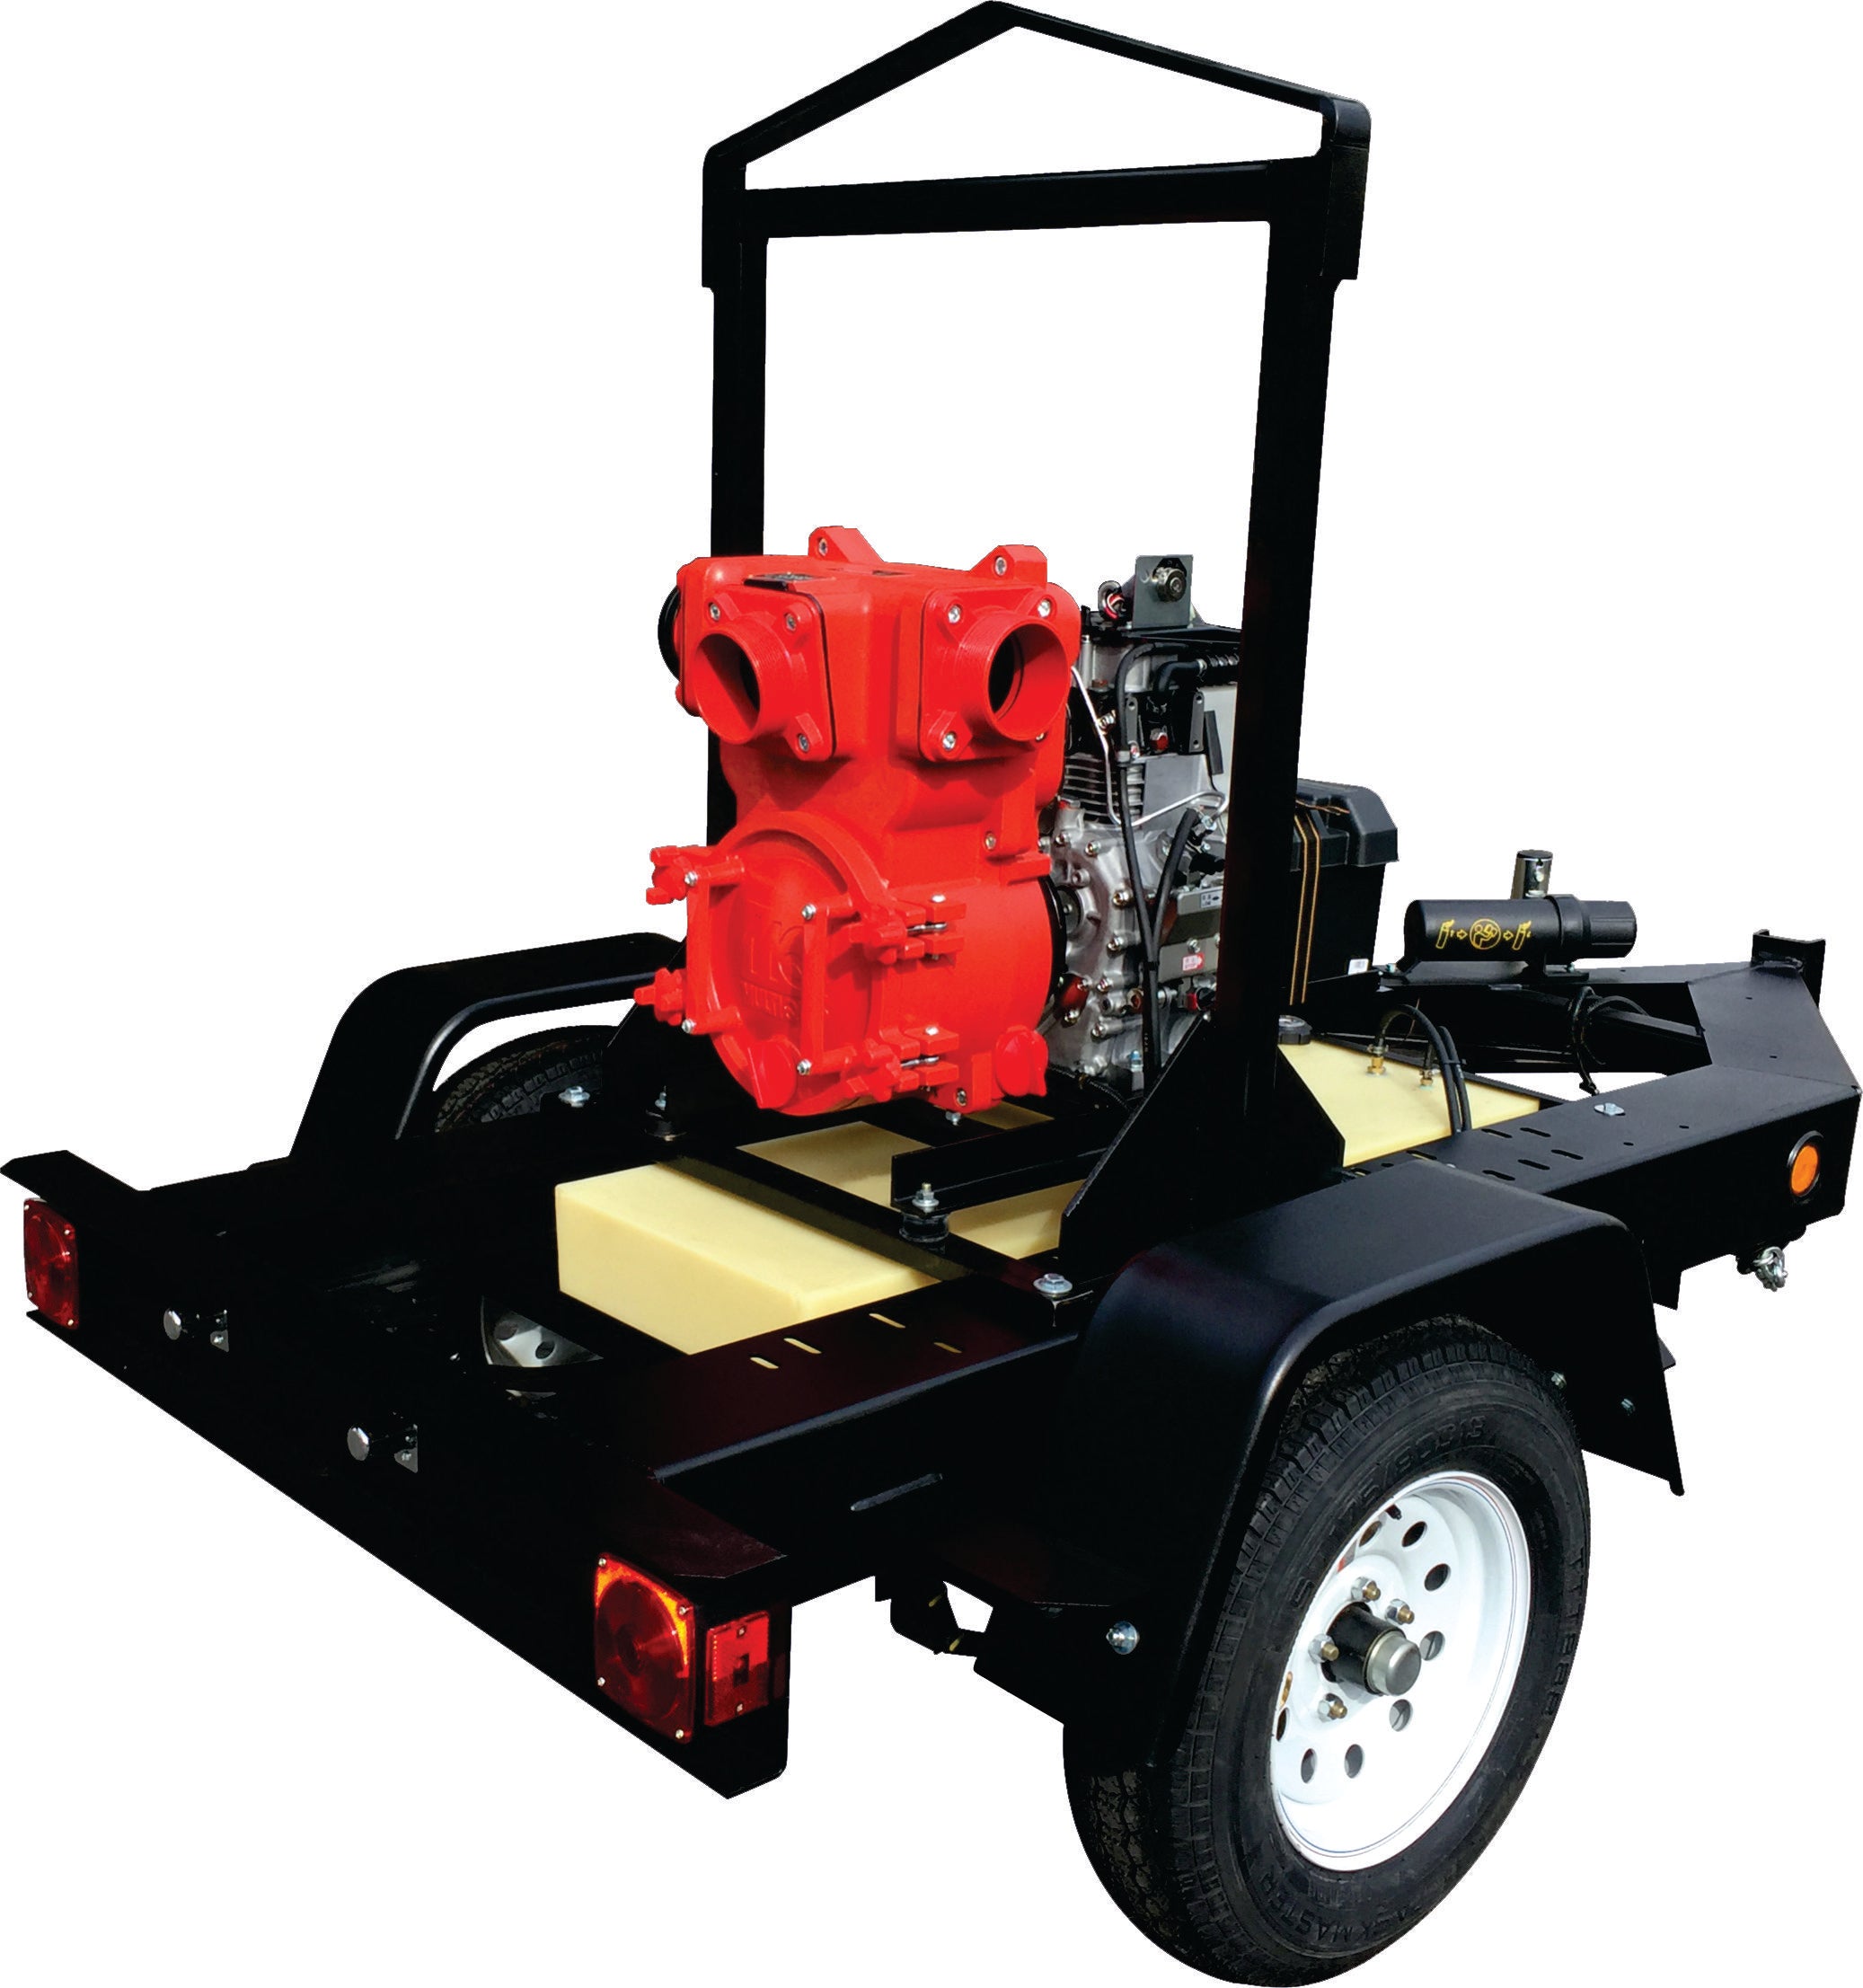 Multiquip QP4TKT16 Trailer Mounted 4-Inch Diesel Engine Trash Pump with 16 Gallon Fuel Cell and Electric Start